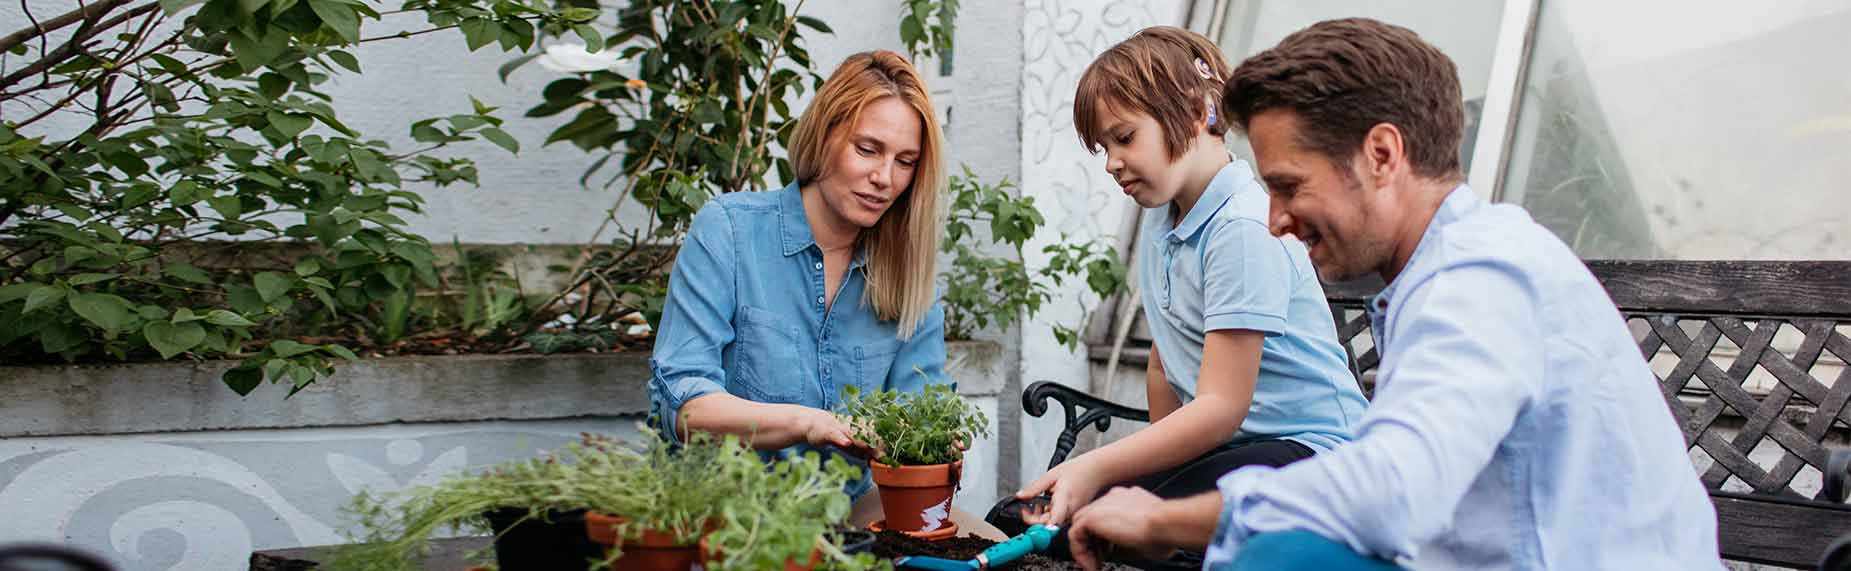 Father, mother, and their son with cochlear implant planting herbs on balcony.